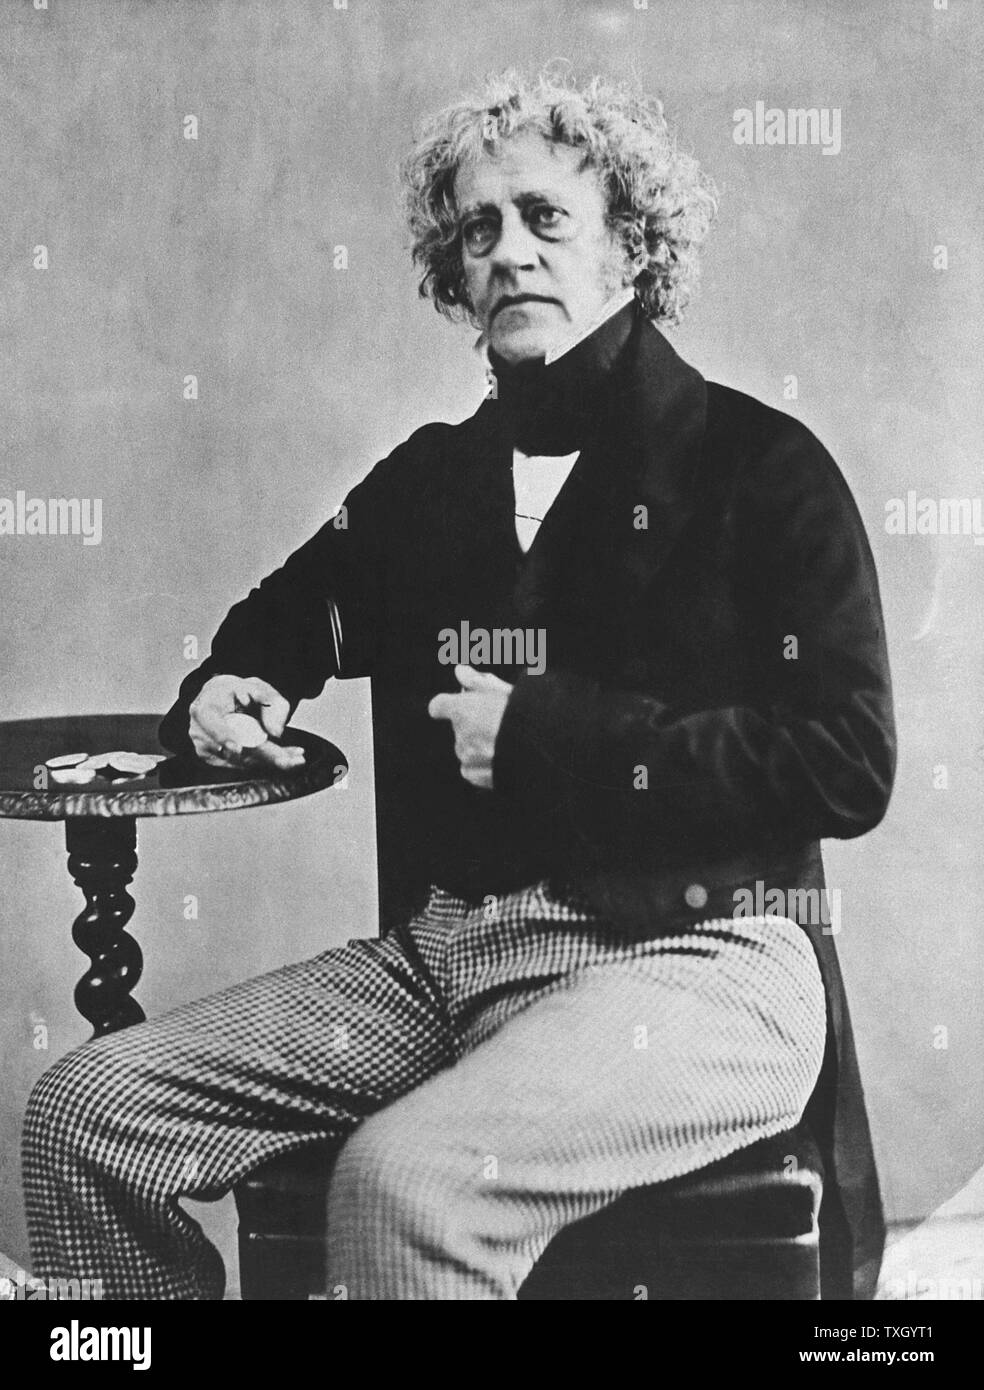 John Frederick Herschel (1792-1871) English astronomer and scientist, from photograph when Master of the Mint (1850-55) showing him holding a florin (2 shilling piece) which was being introduced with the idea of decimalization of the coinage Stock Photo